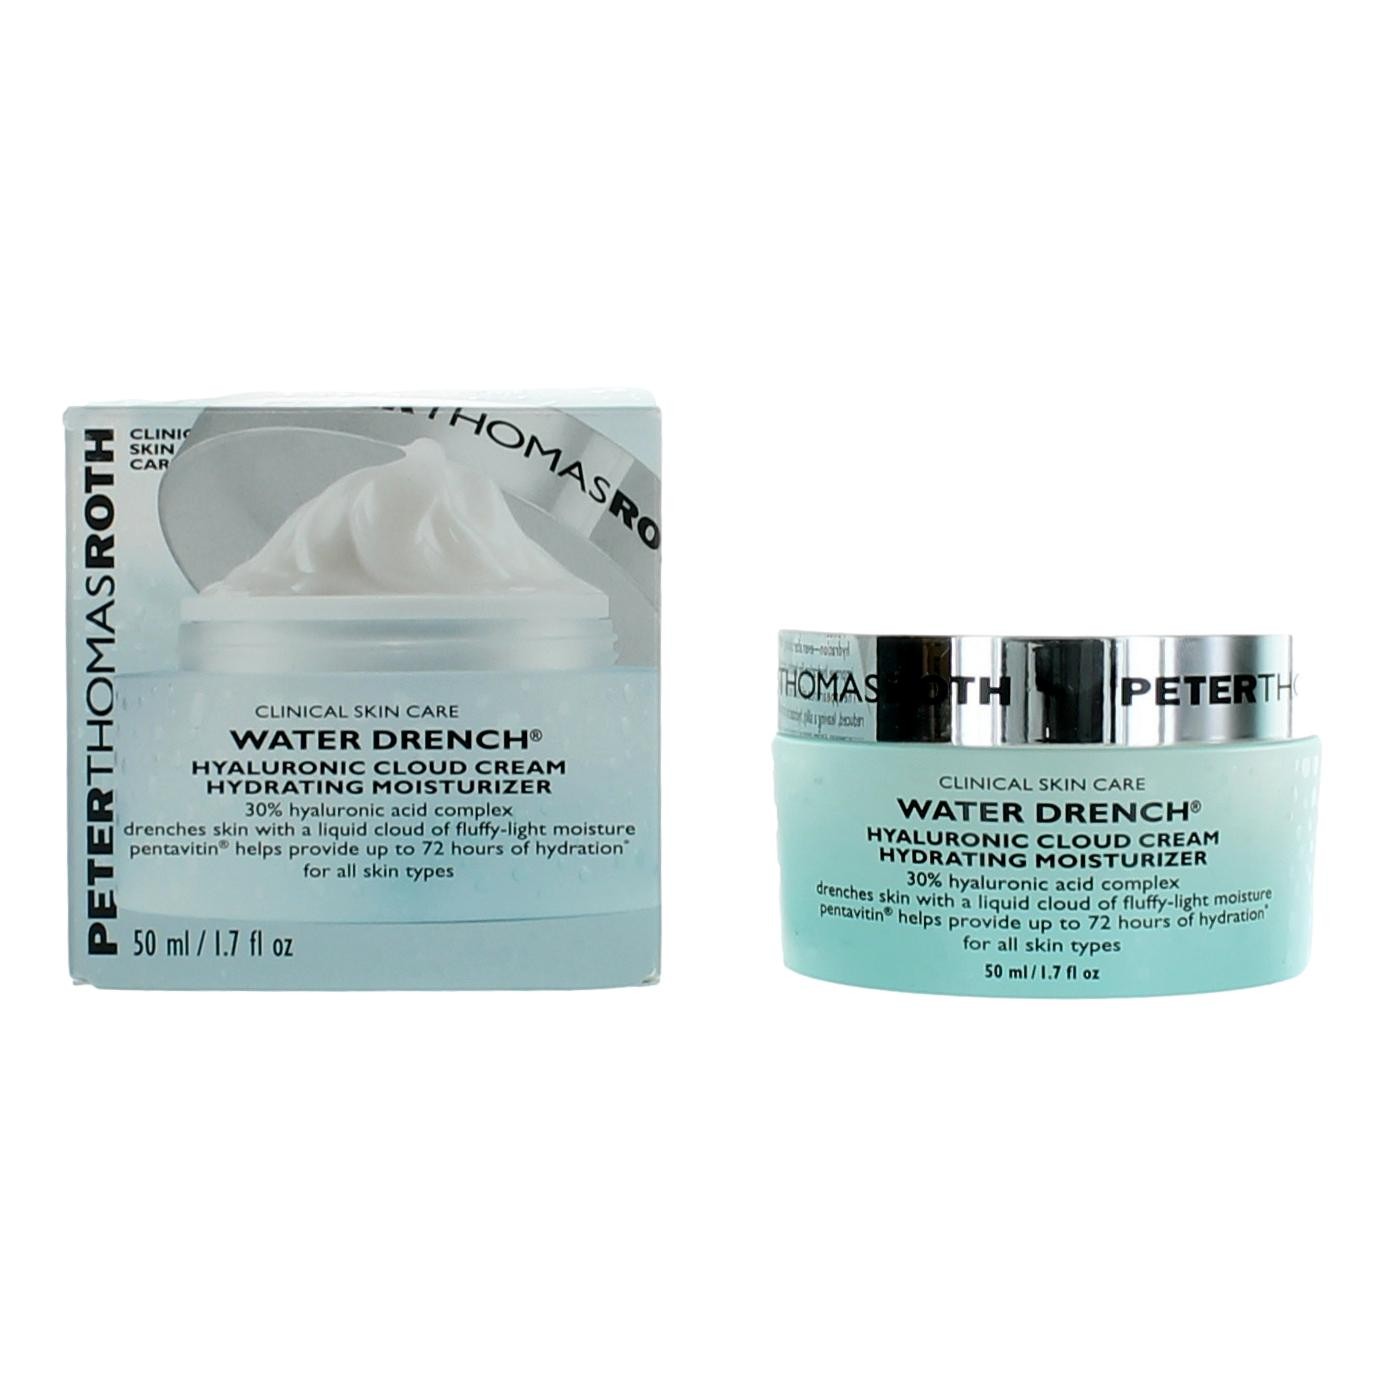 Peter Thomas Roth Water Drench Hyaluronic Cloud Cream 1.7 Hydrating Moisturizer - image 1 of 8